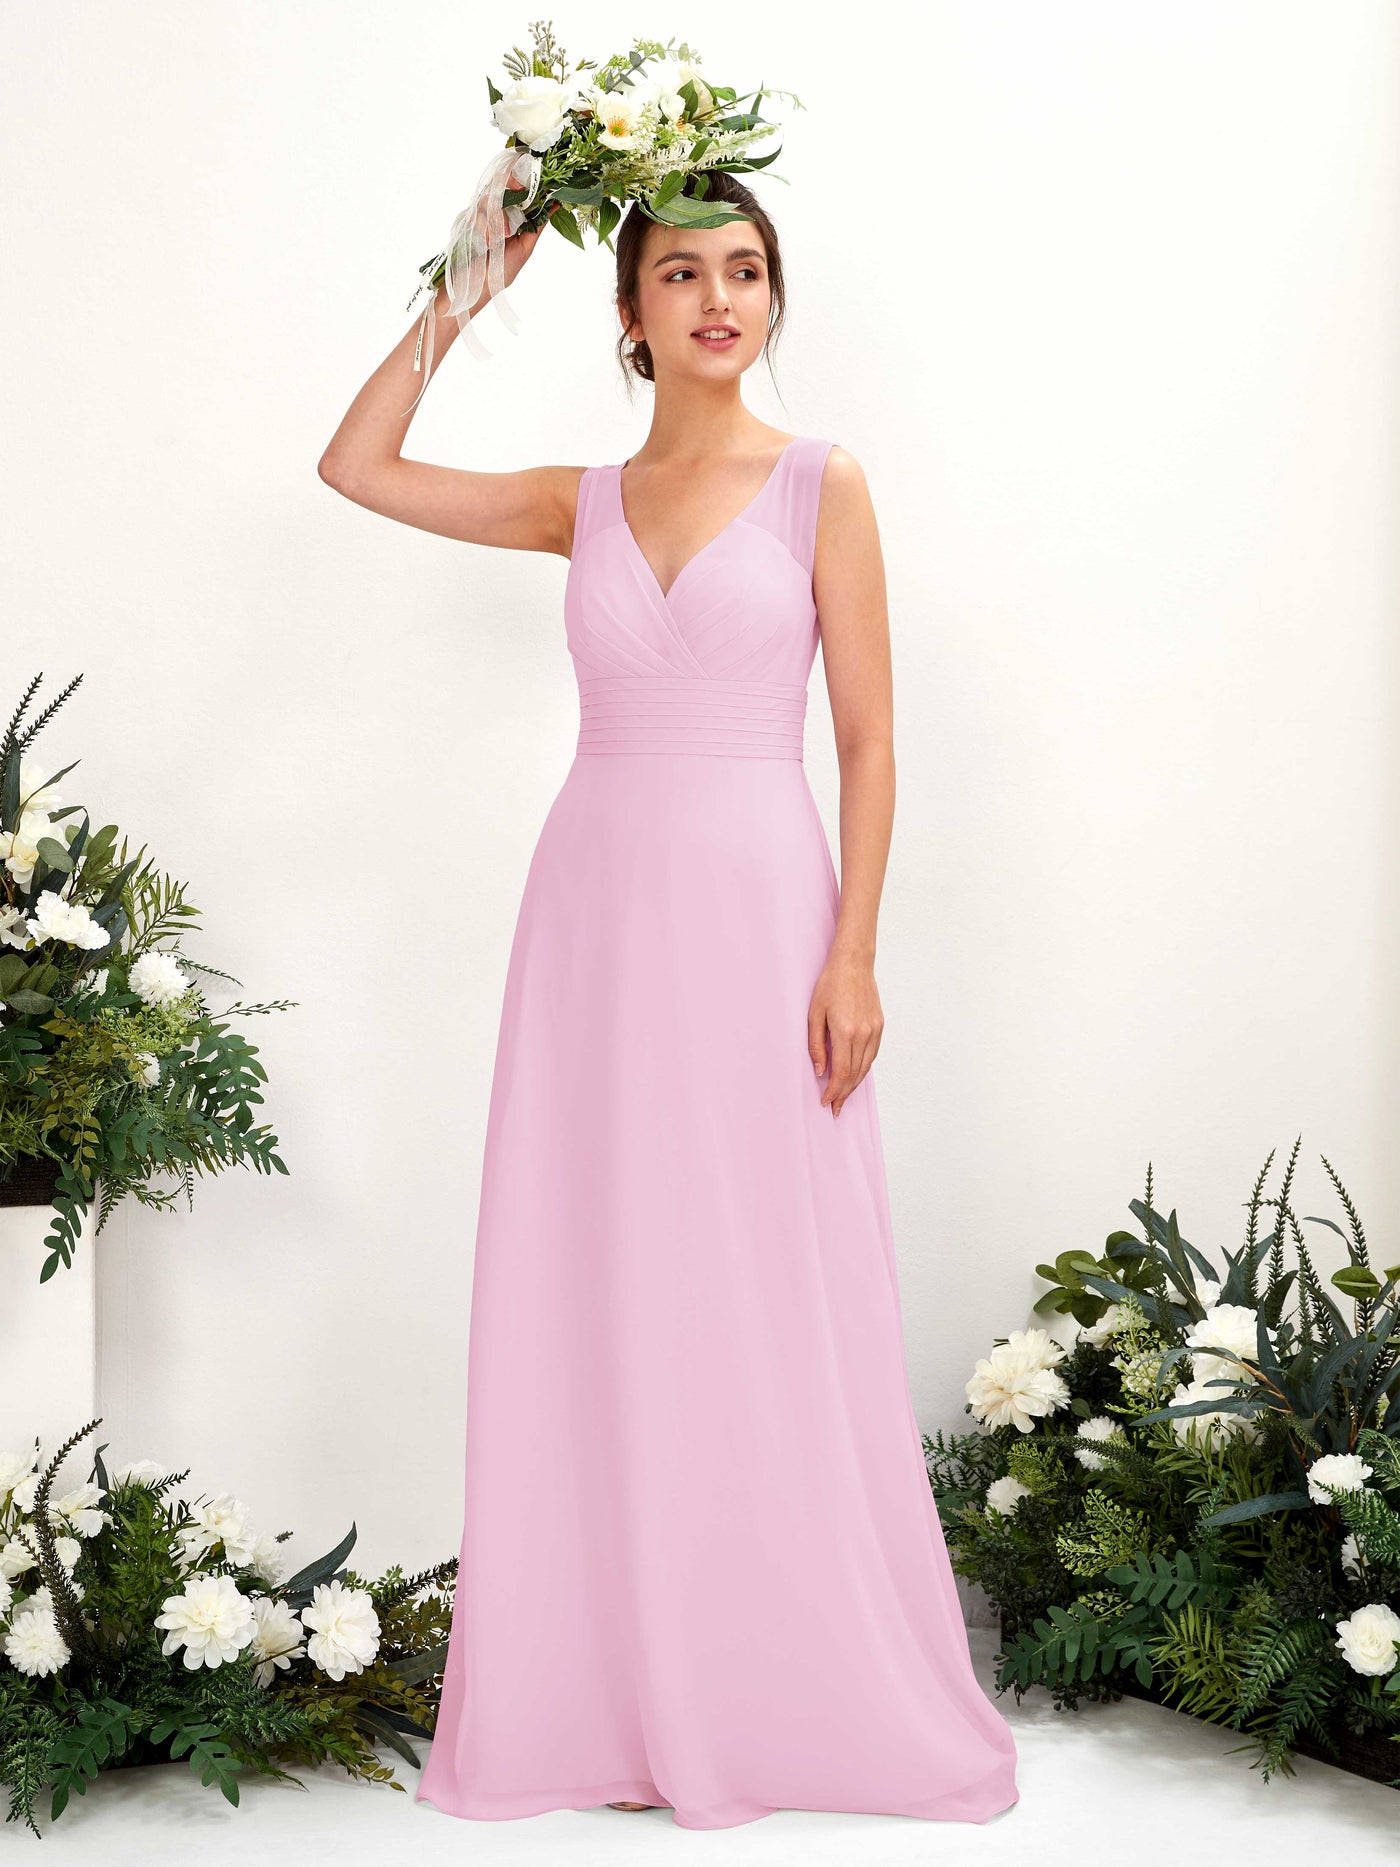 Candy Pink Bridesmaid Dresses Bridesmaid Dress A-line Chiffon Straps Full Length Sleeveless Wedding Party Dress (81220939)#color_candy-pink